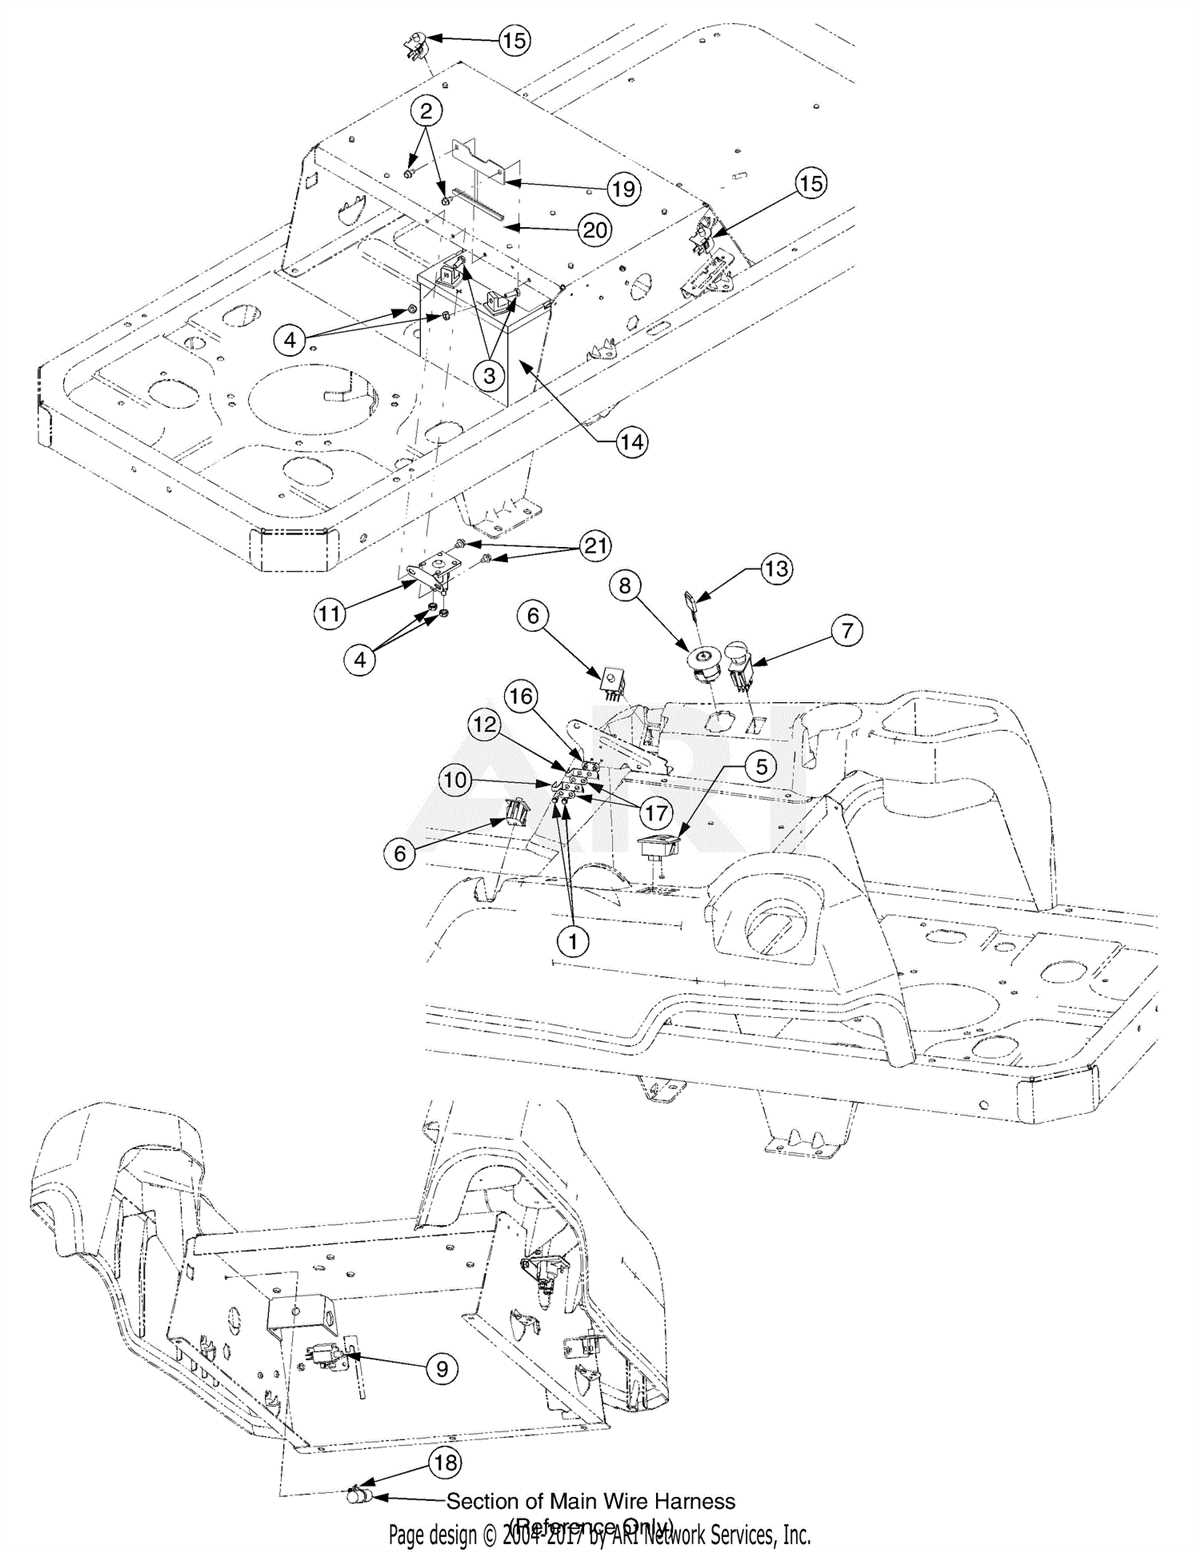 Complete Wiring Schematic For Cub Cadet Rzt